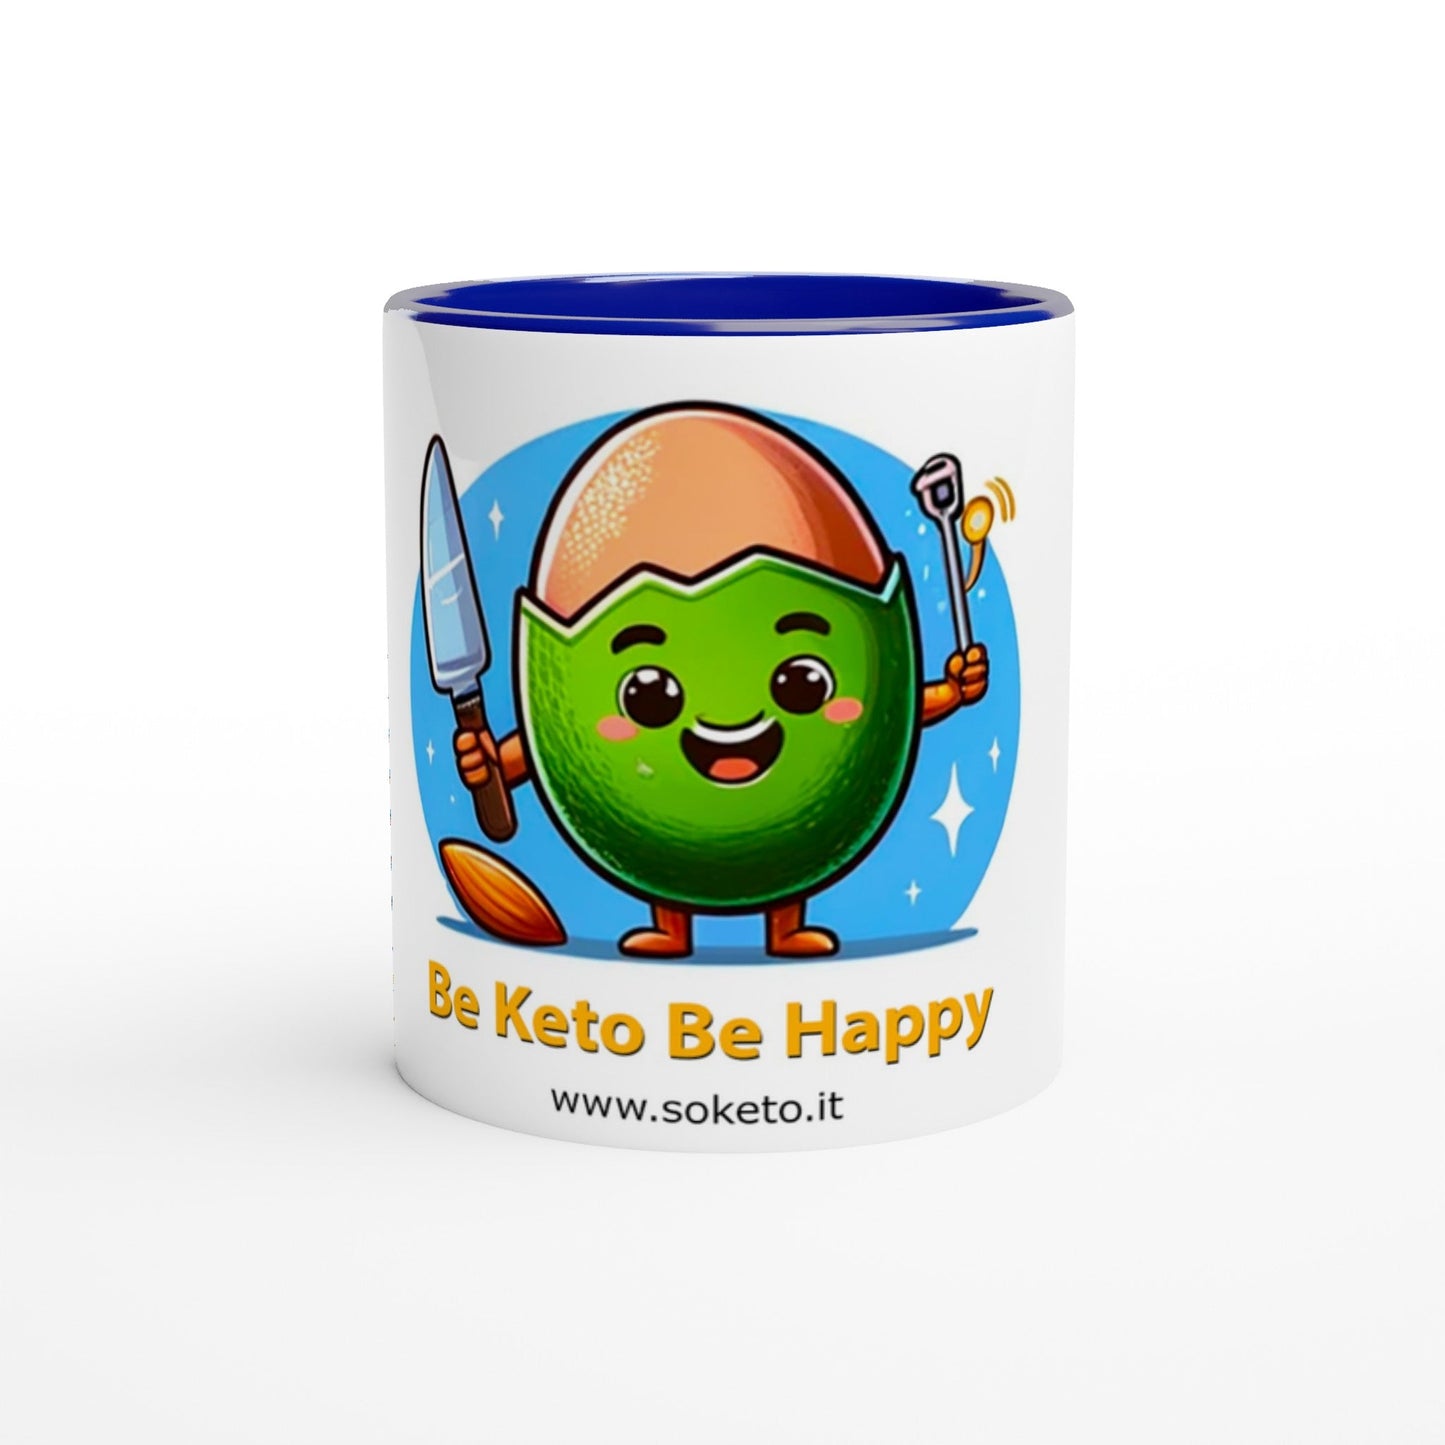 350ml "Be Keto Be Happy" Mug with Colored Interior - Start the Day with Style and Health-1